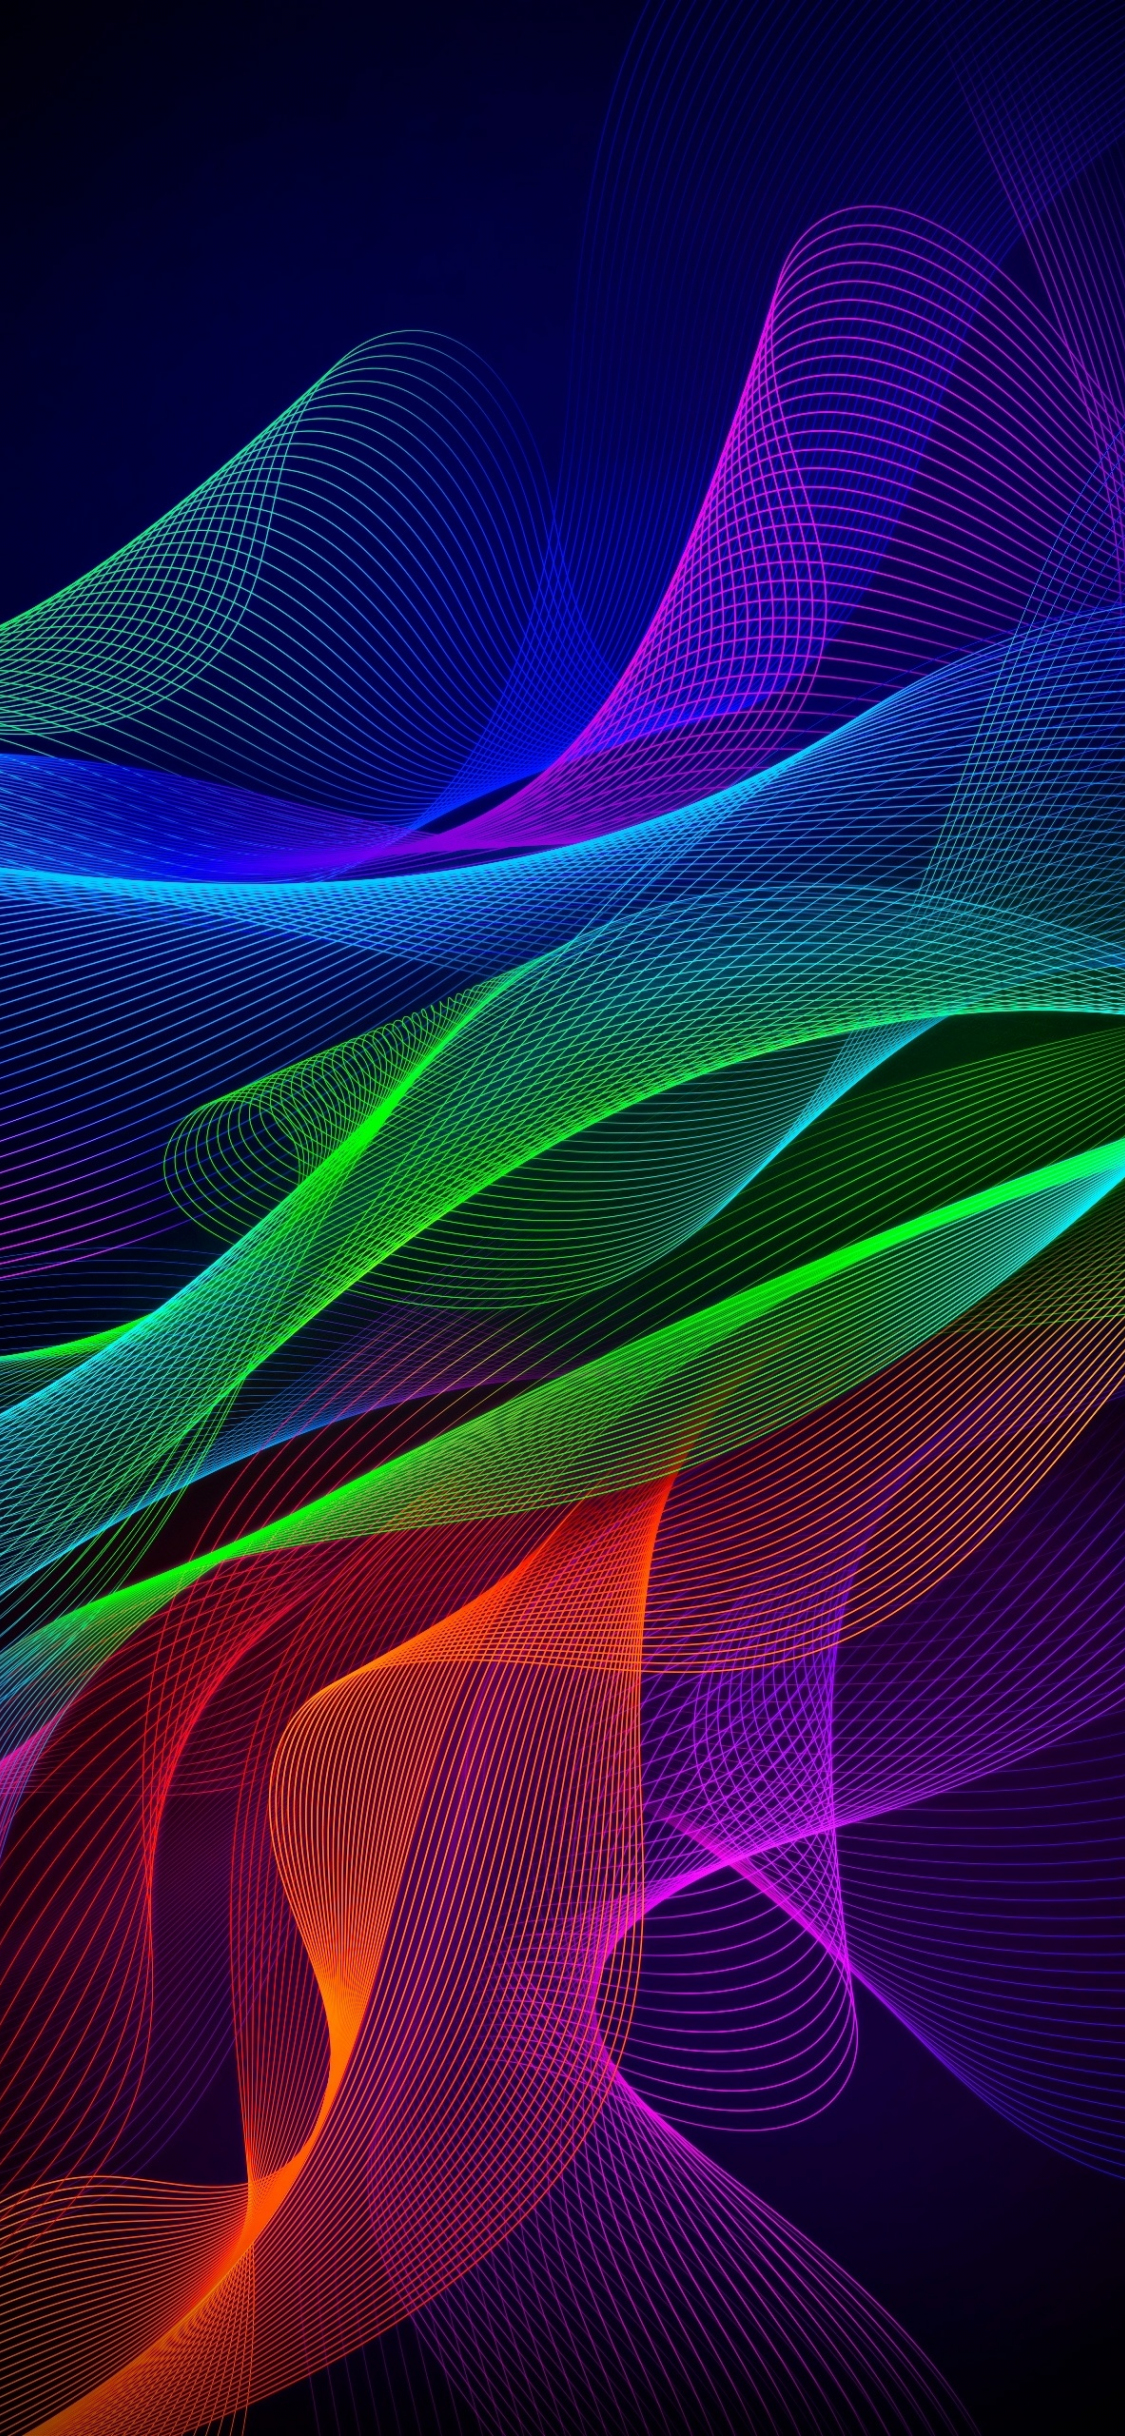 Download Colorful Lines Abstract Razer Phone Stock 1125x2436 Wallpaper Iphone X 1125x2436 Hd Image Background